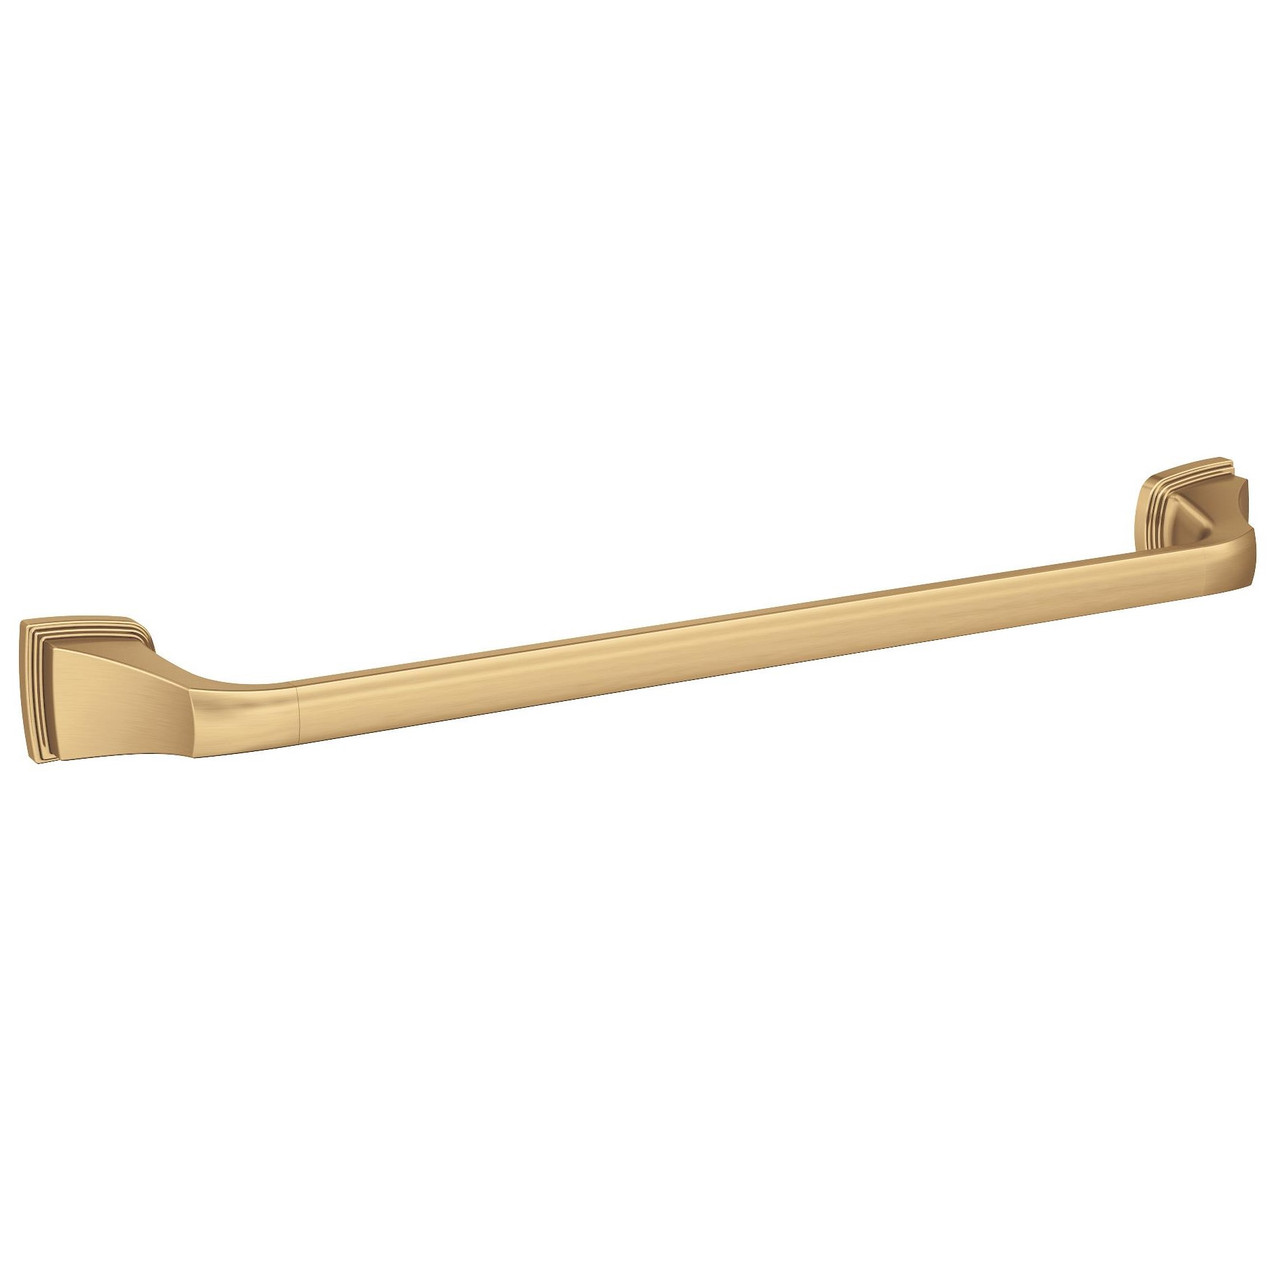 Amerock Revitalize Traditional 18 in (457 mm) Towel Bar BH36033